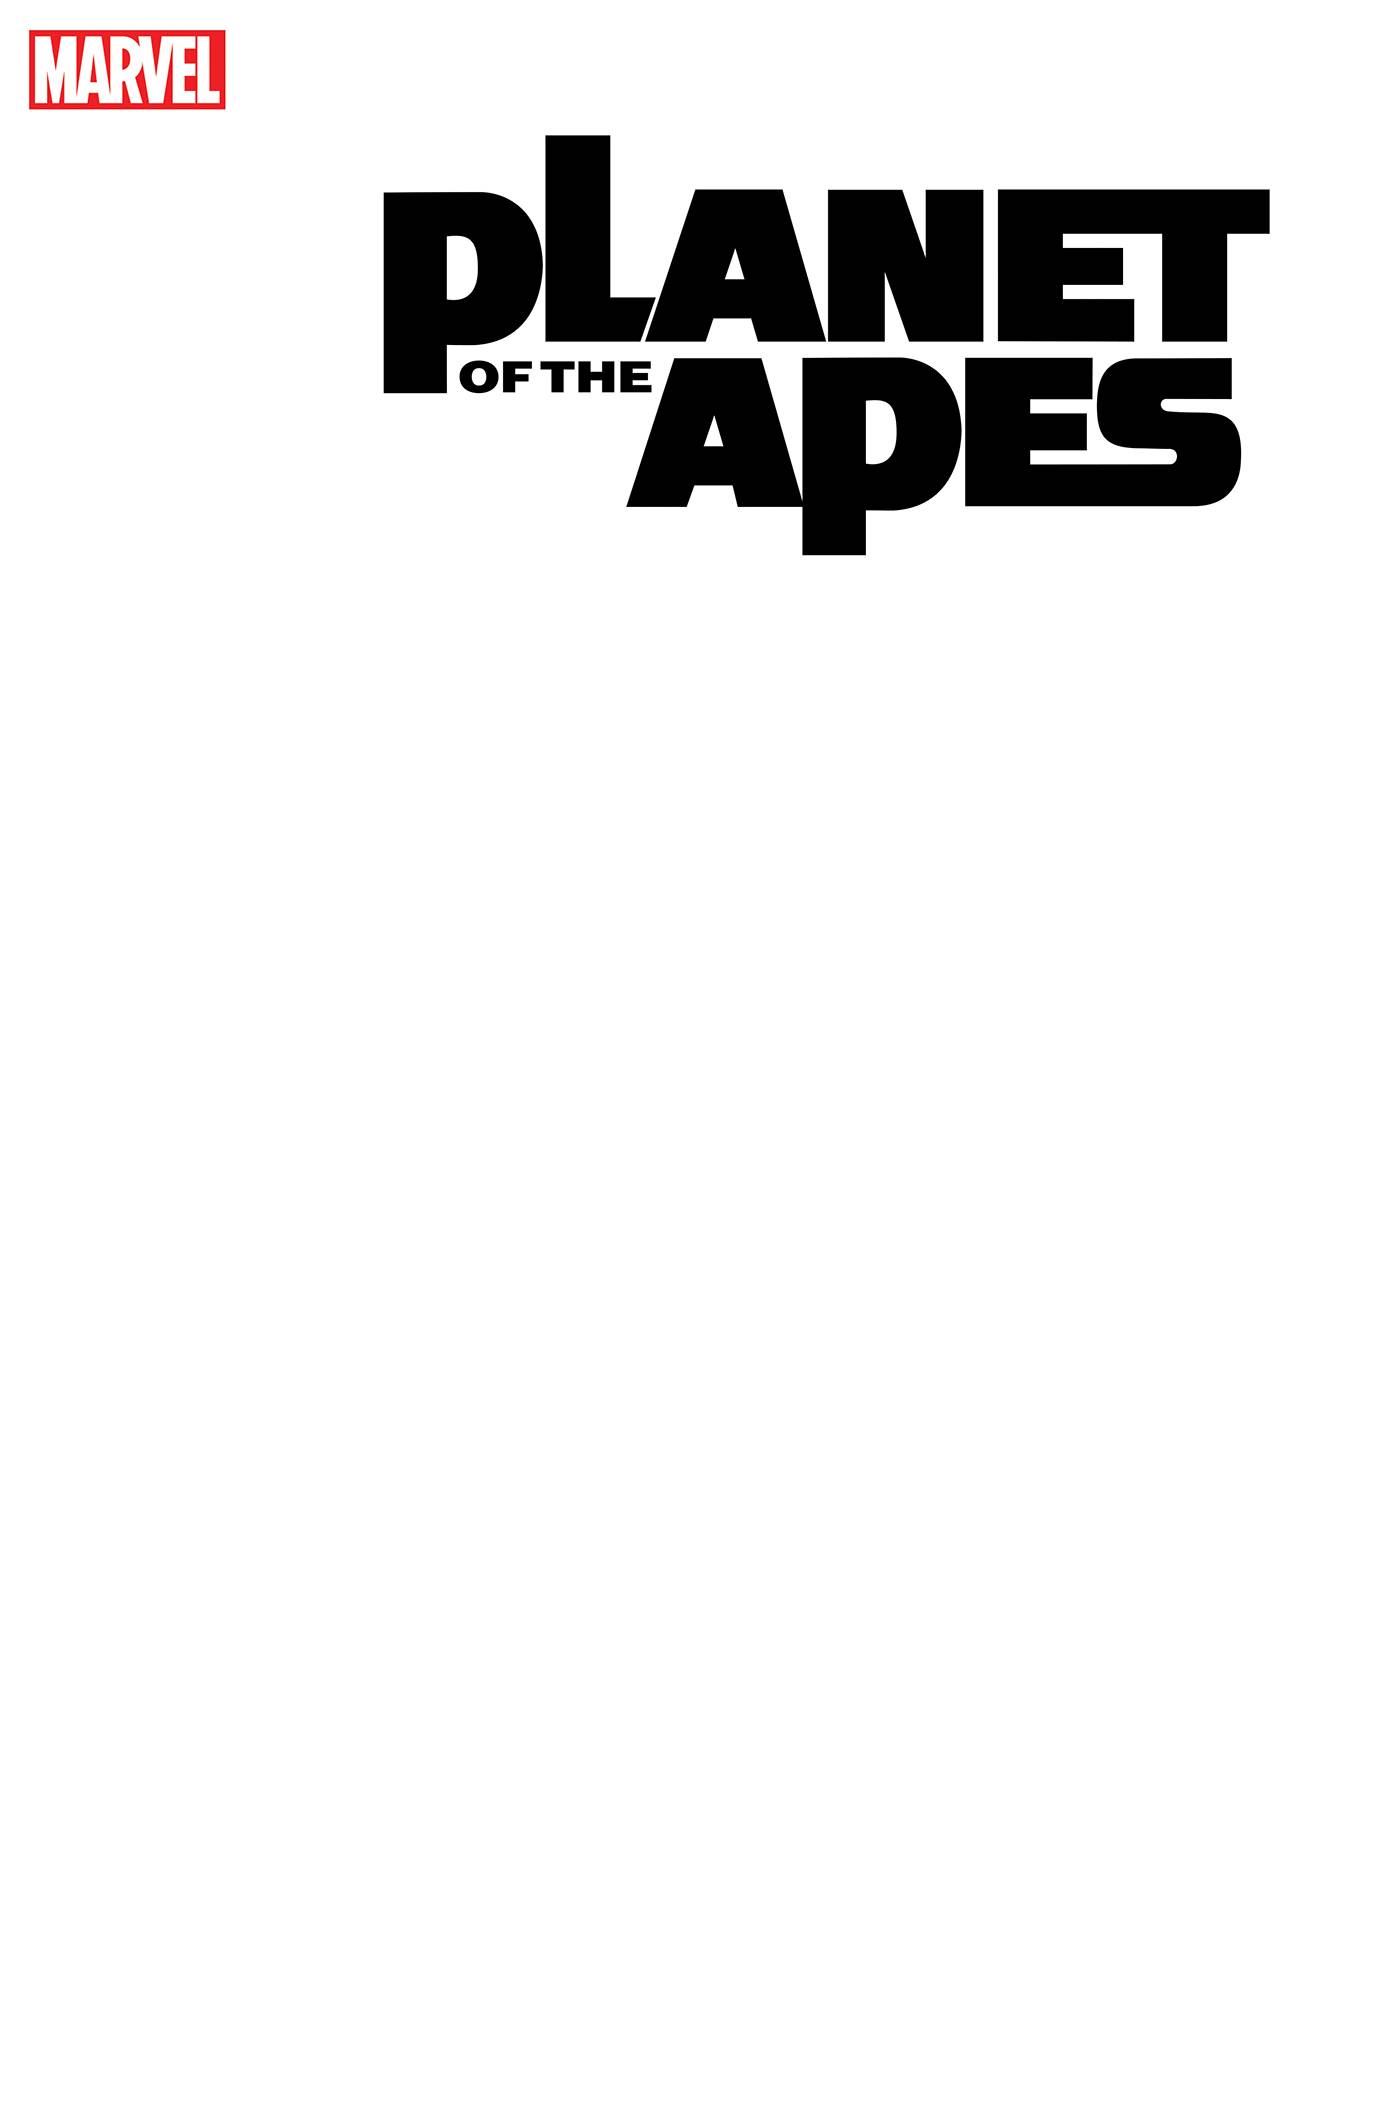 PLANET OF THE APES #1 BLANK VAR